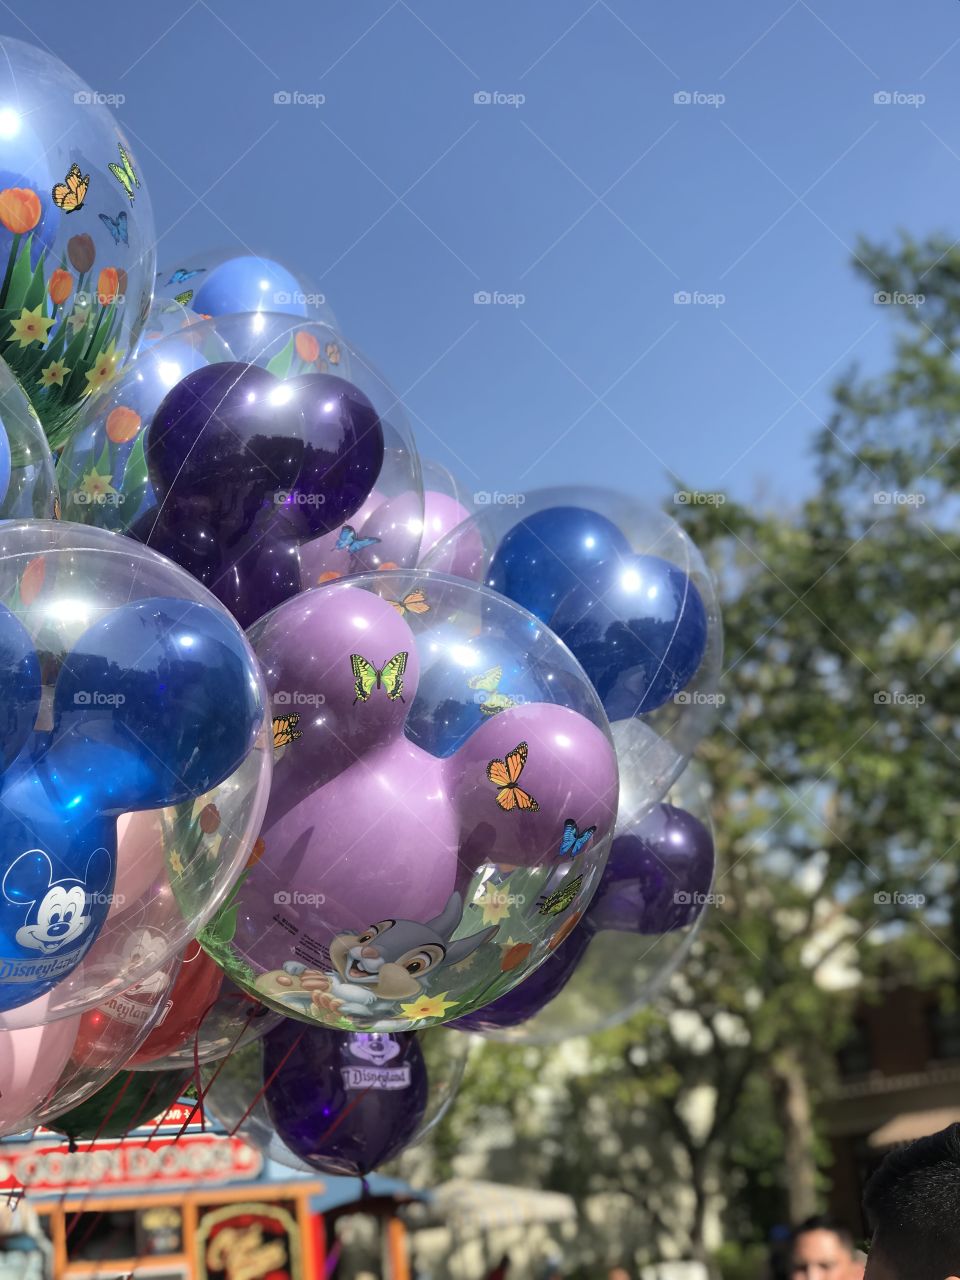 Colorful pastel Mickey Mouse ear balloons floating outside at Disneyland park in California in summer or spring